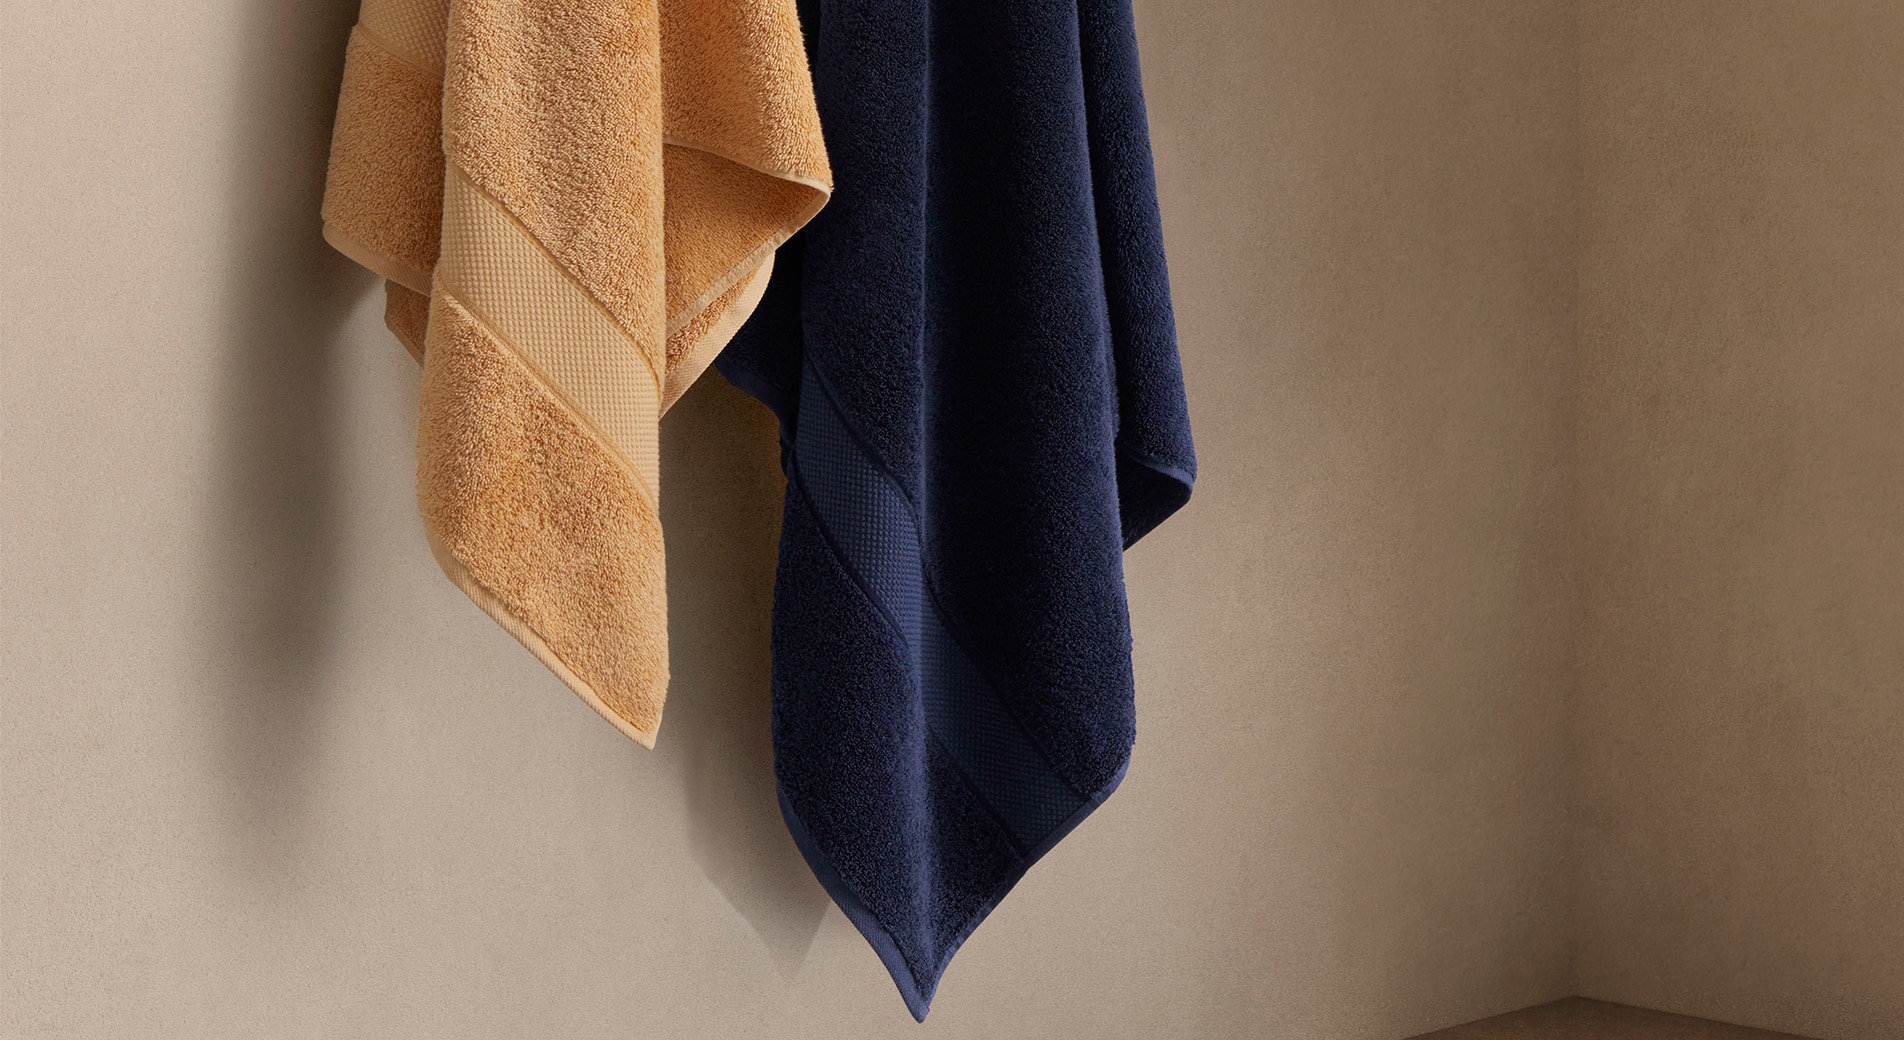 against biege wall, bottom of orange cotton bath towel and navy bath towel hang from hooks.